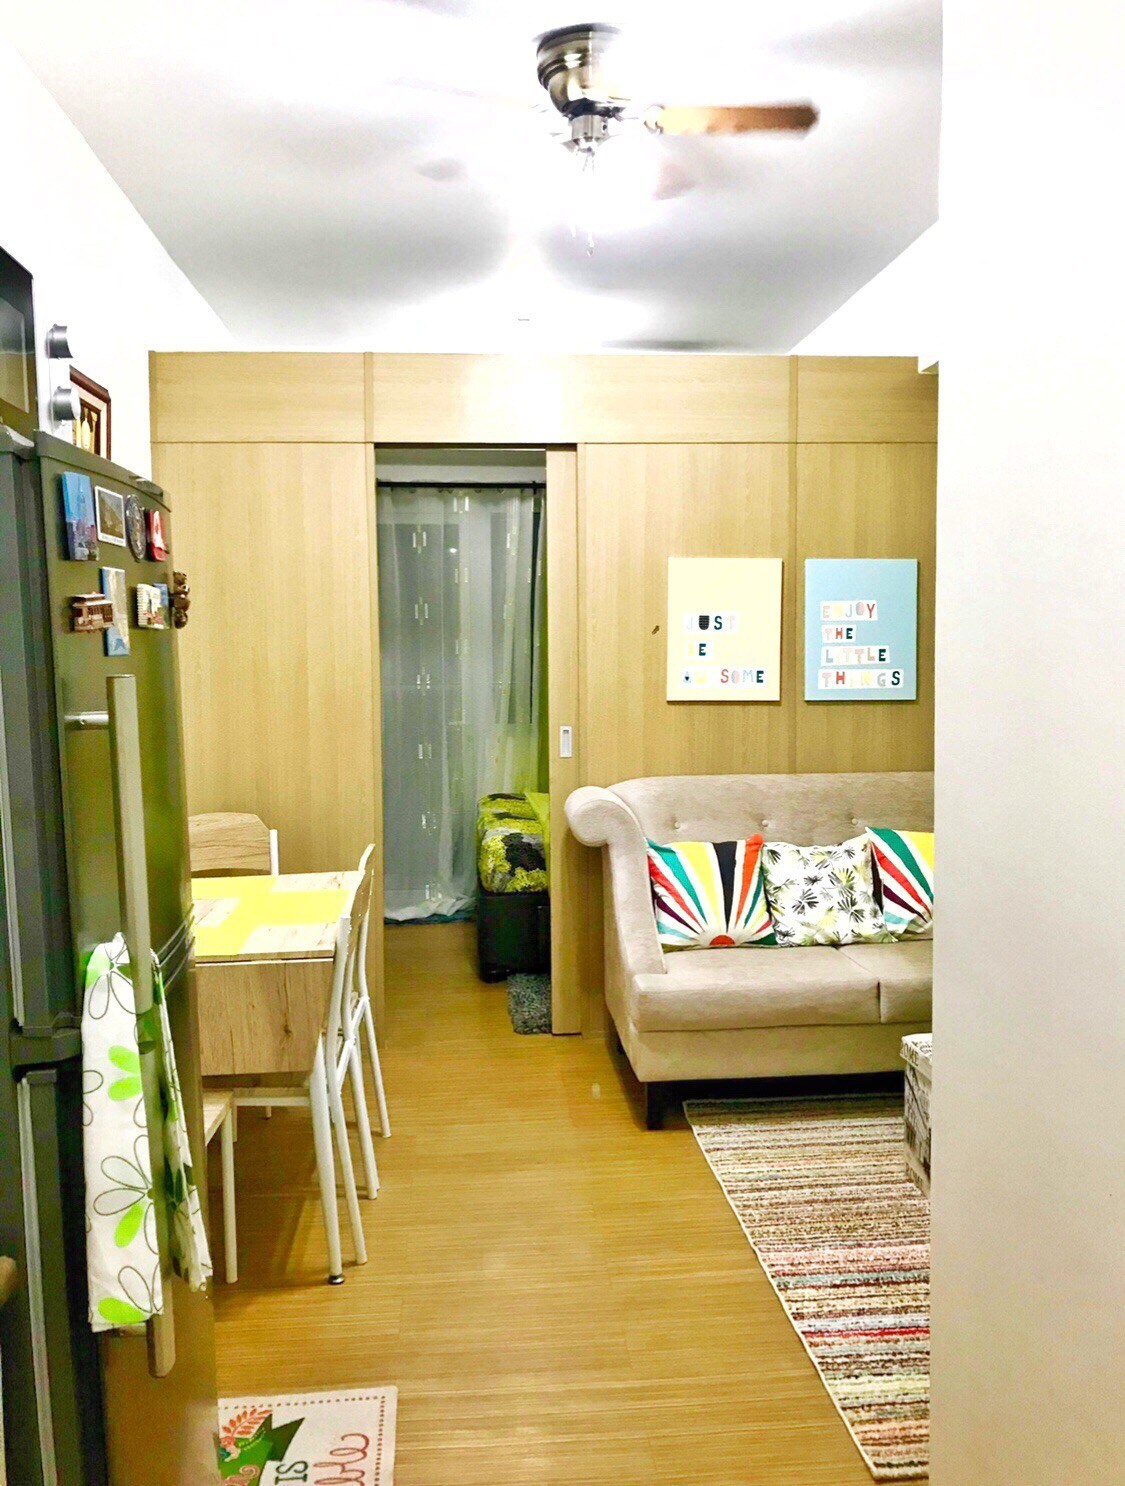 Yuri’s Crib - Best Place for Staycation for 1BR